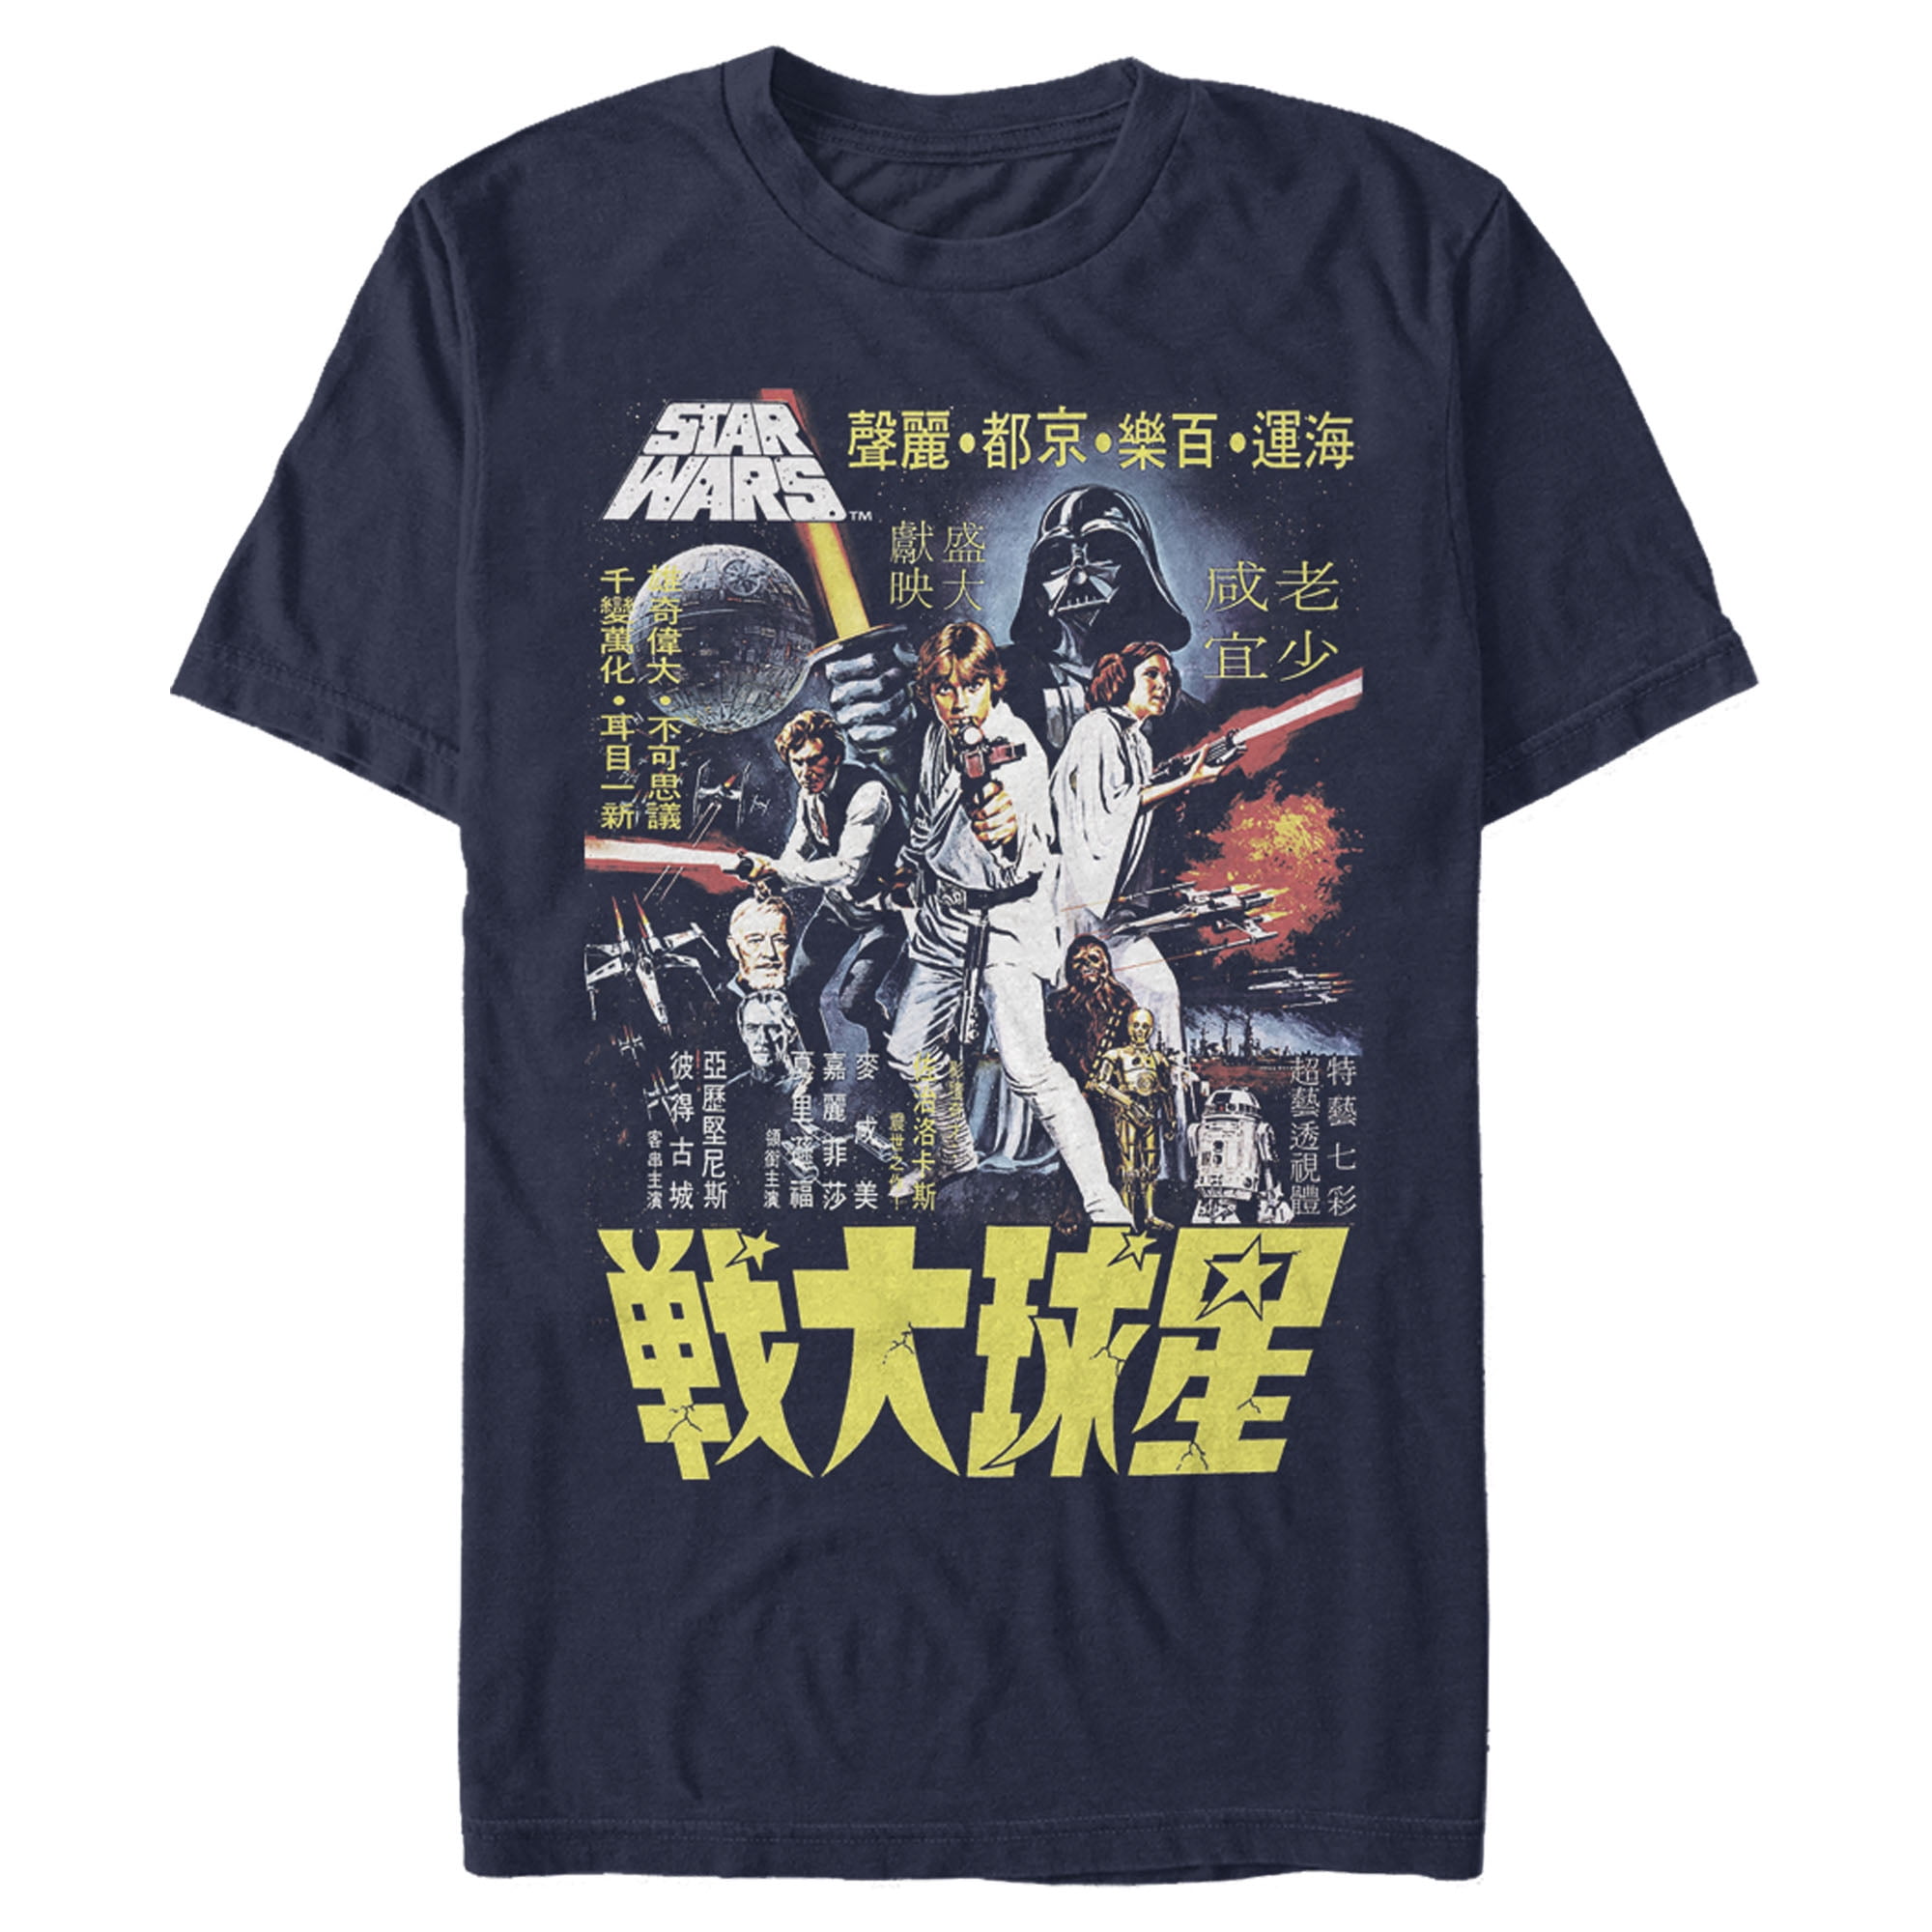 Vintage Star Wars Japanese Poster Light Grey T-Shirt by Re:Covered 